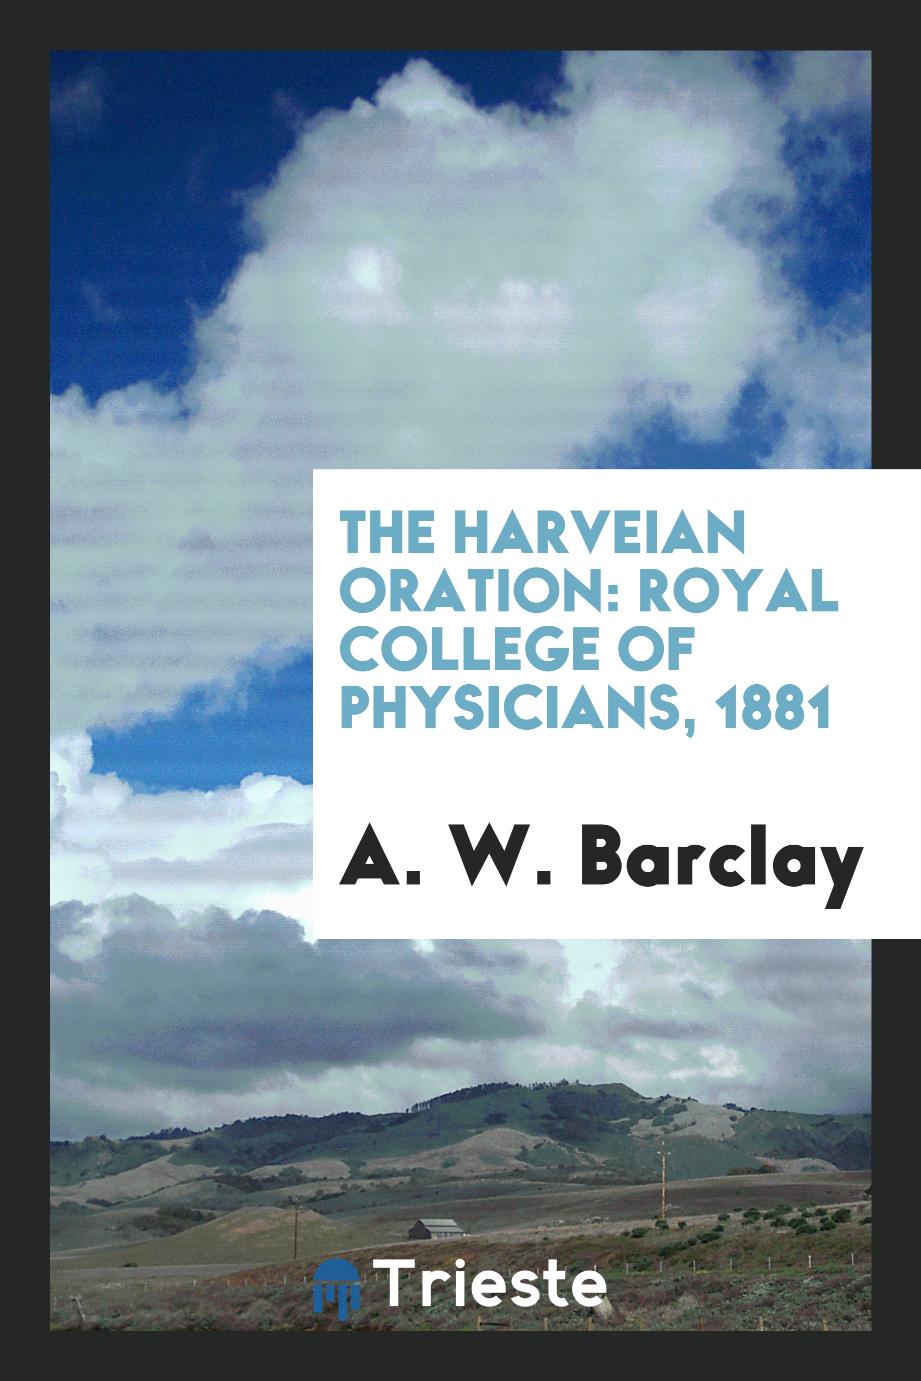 The Harveian Oration: Royal College of Physicians, 1881